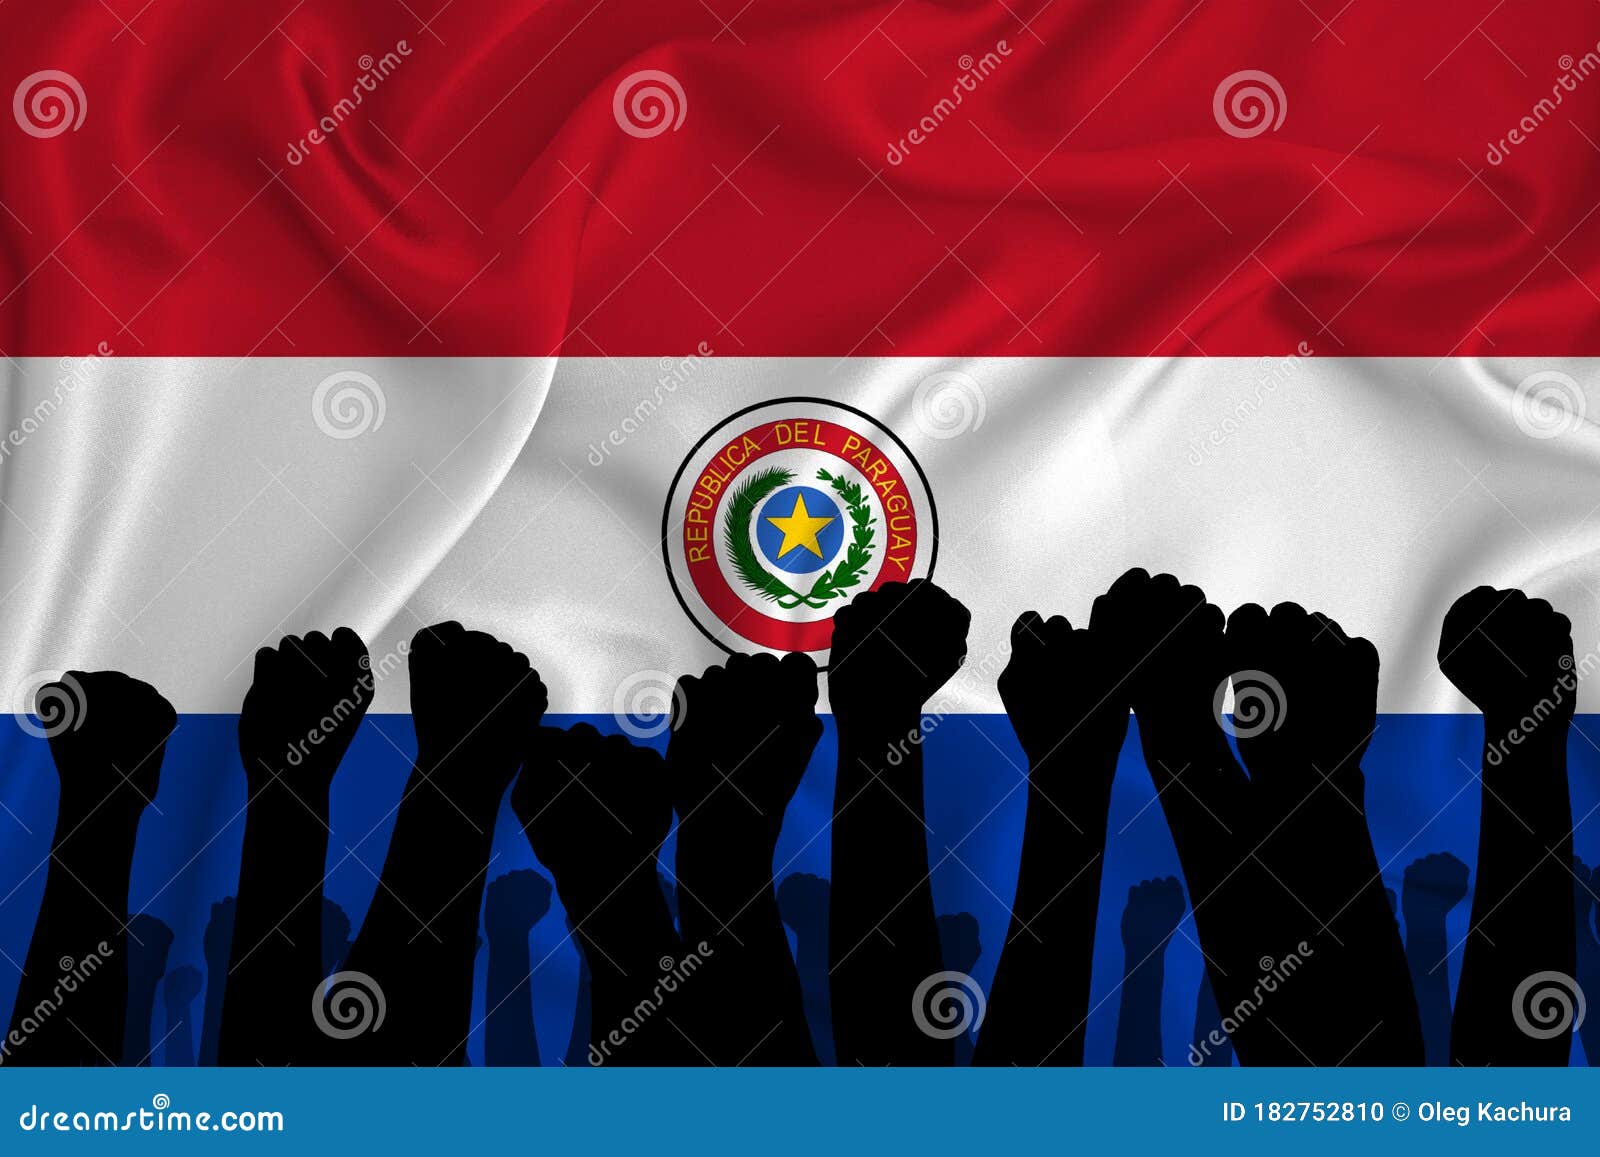 silhouette of raised arms and clenched fists on the background of the flag of paraguai. the concept of power,  conflict. with